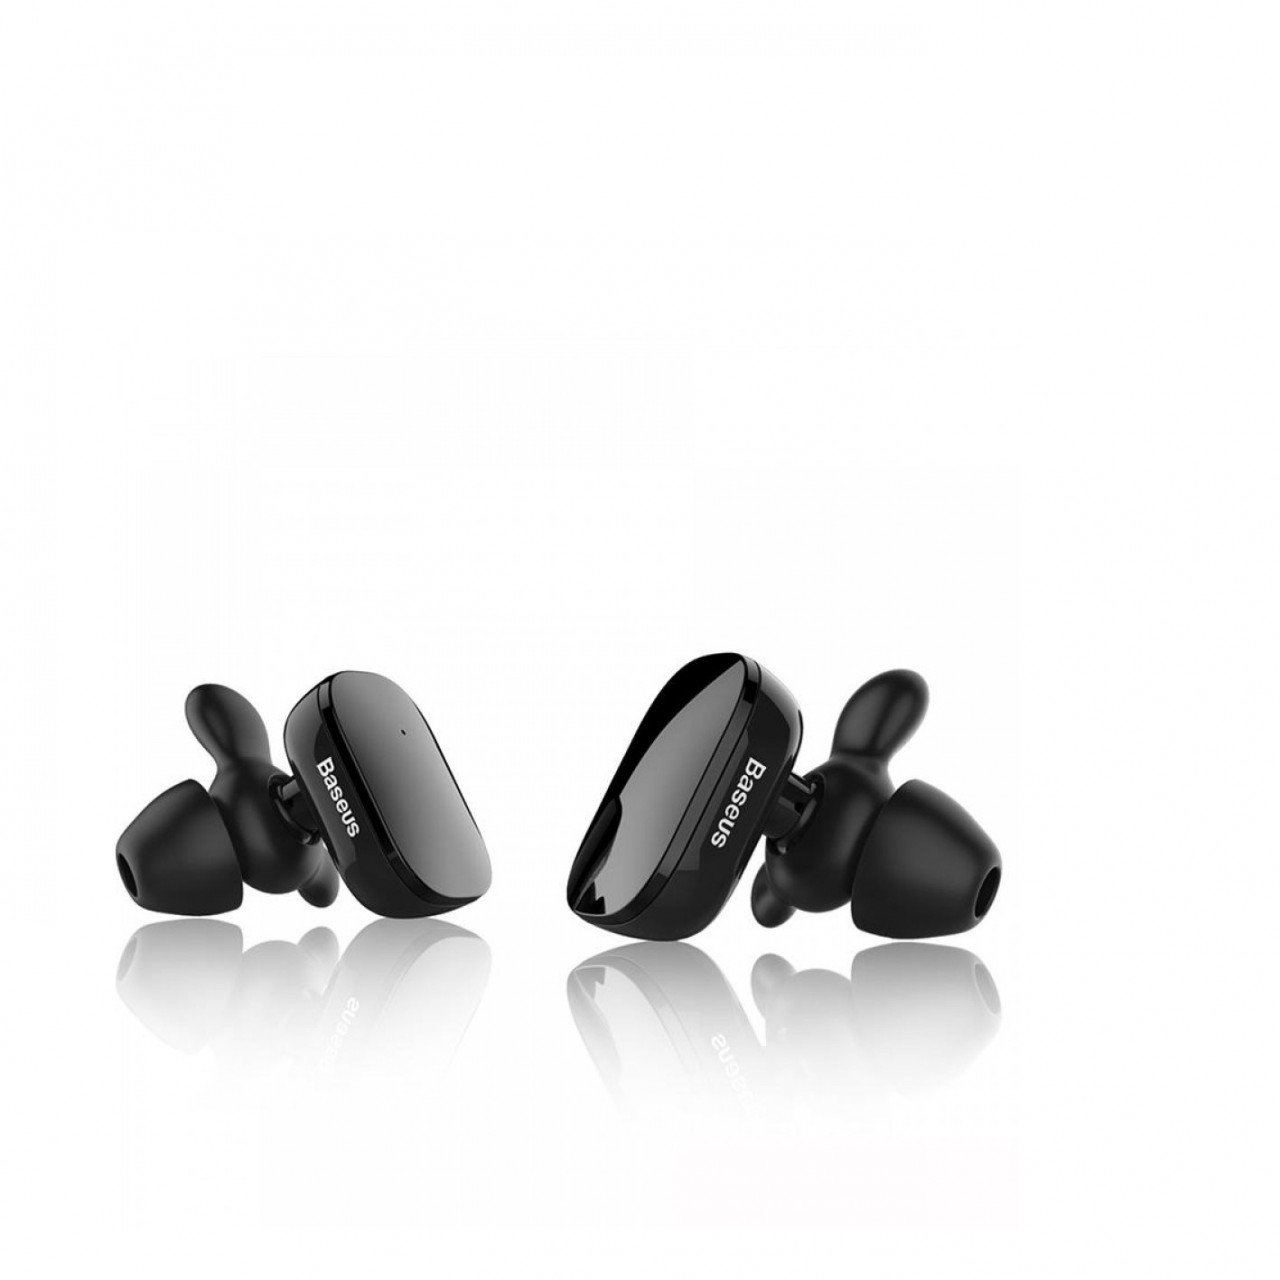 Baseus W02 Truly Wireless Bluetooth Earphone Headset With Microphone & Intelligent Touch Control